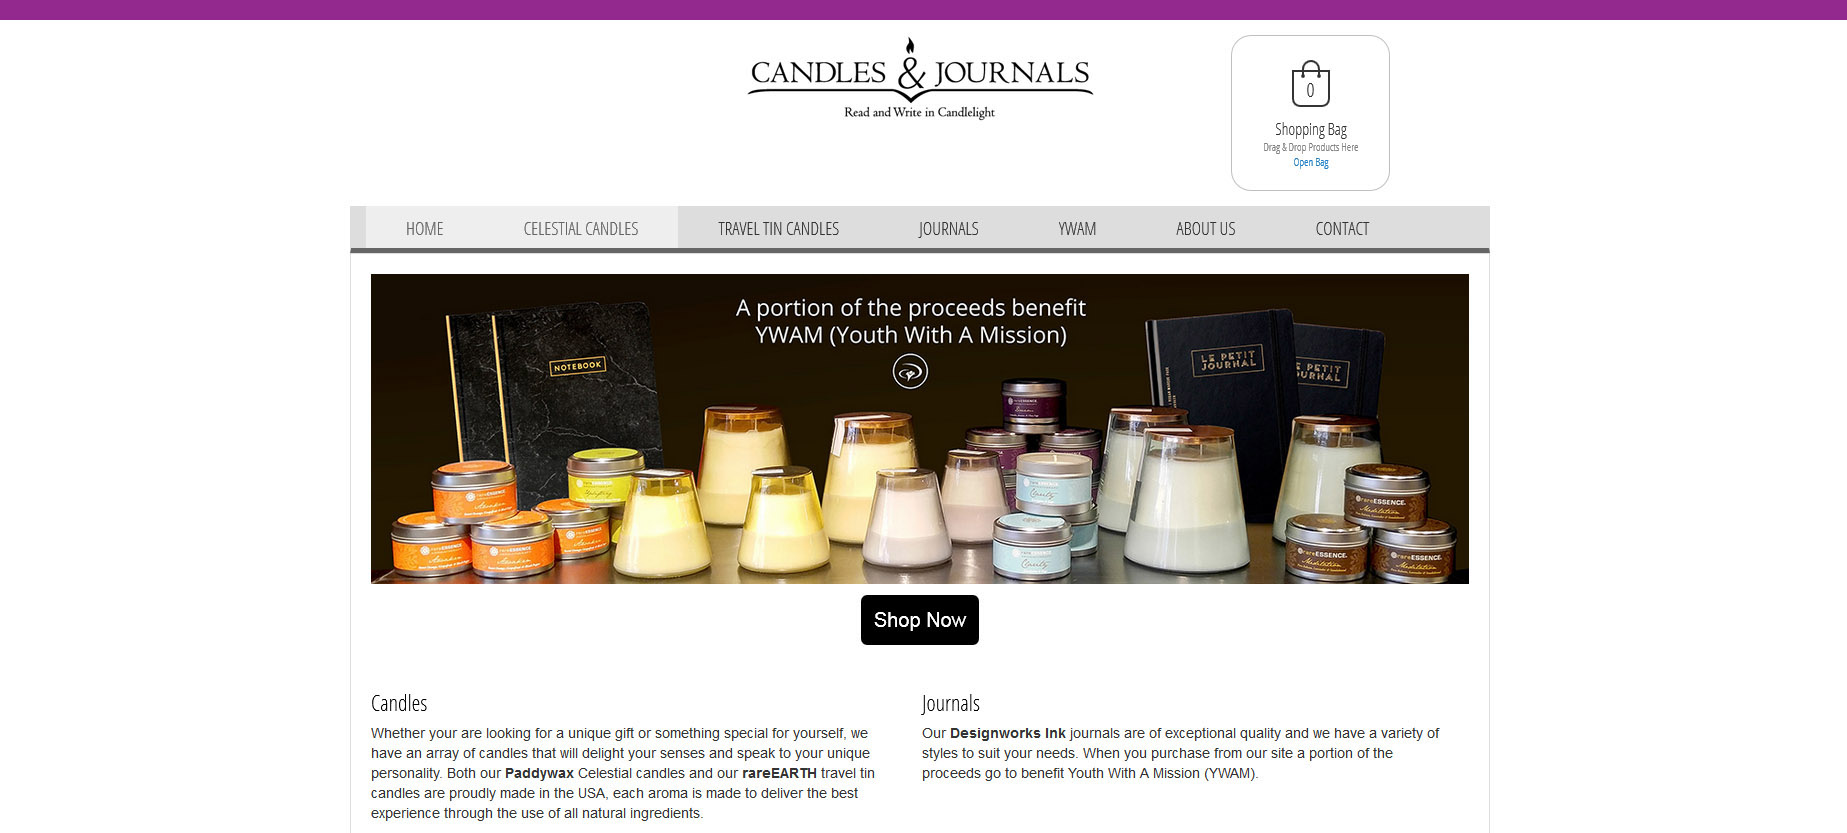 ecwid web design photo of candles and journals